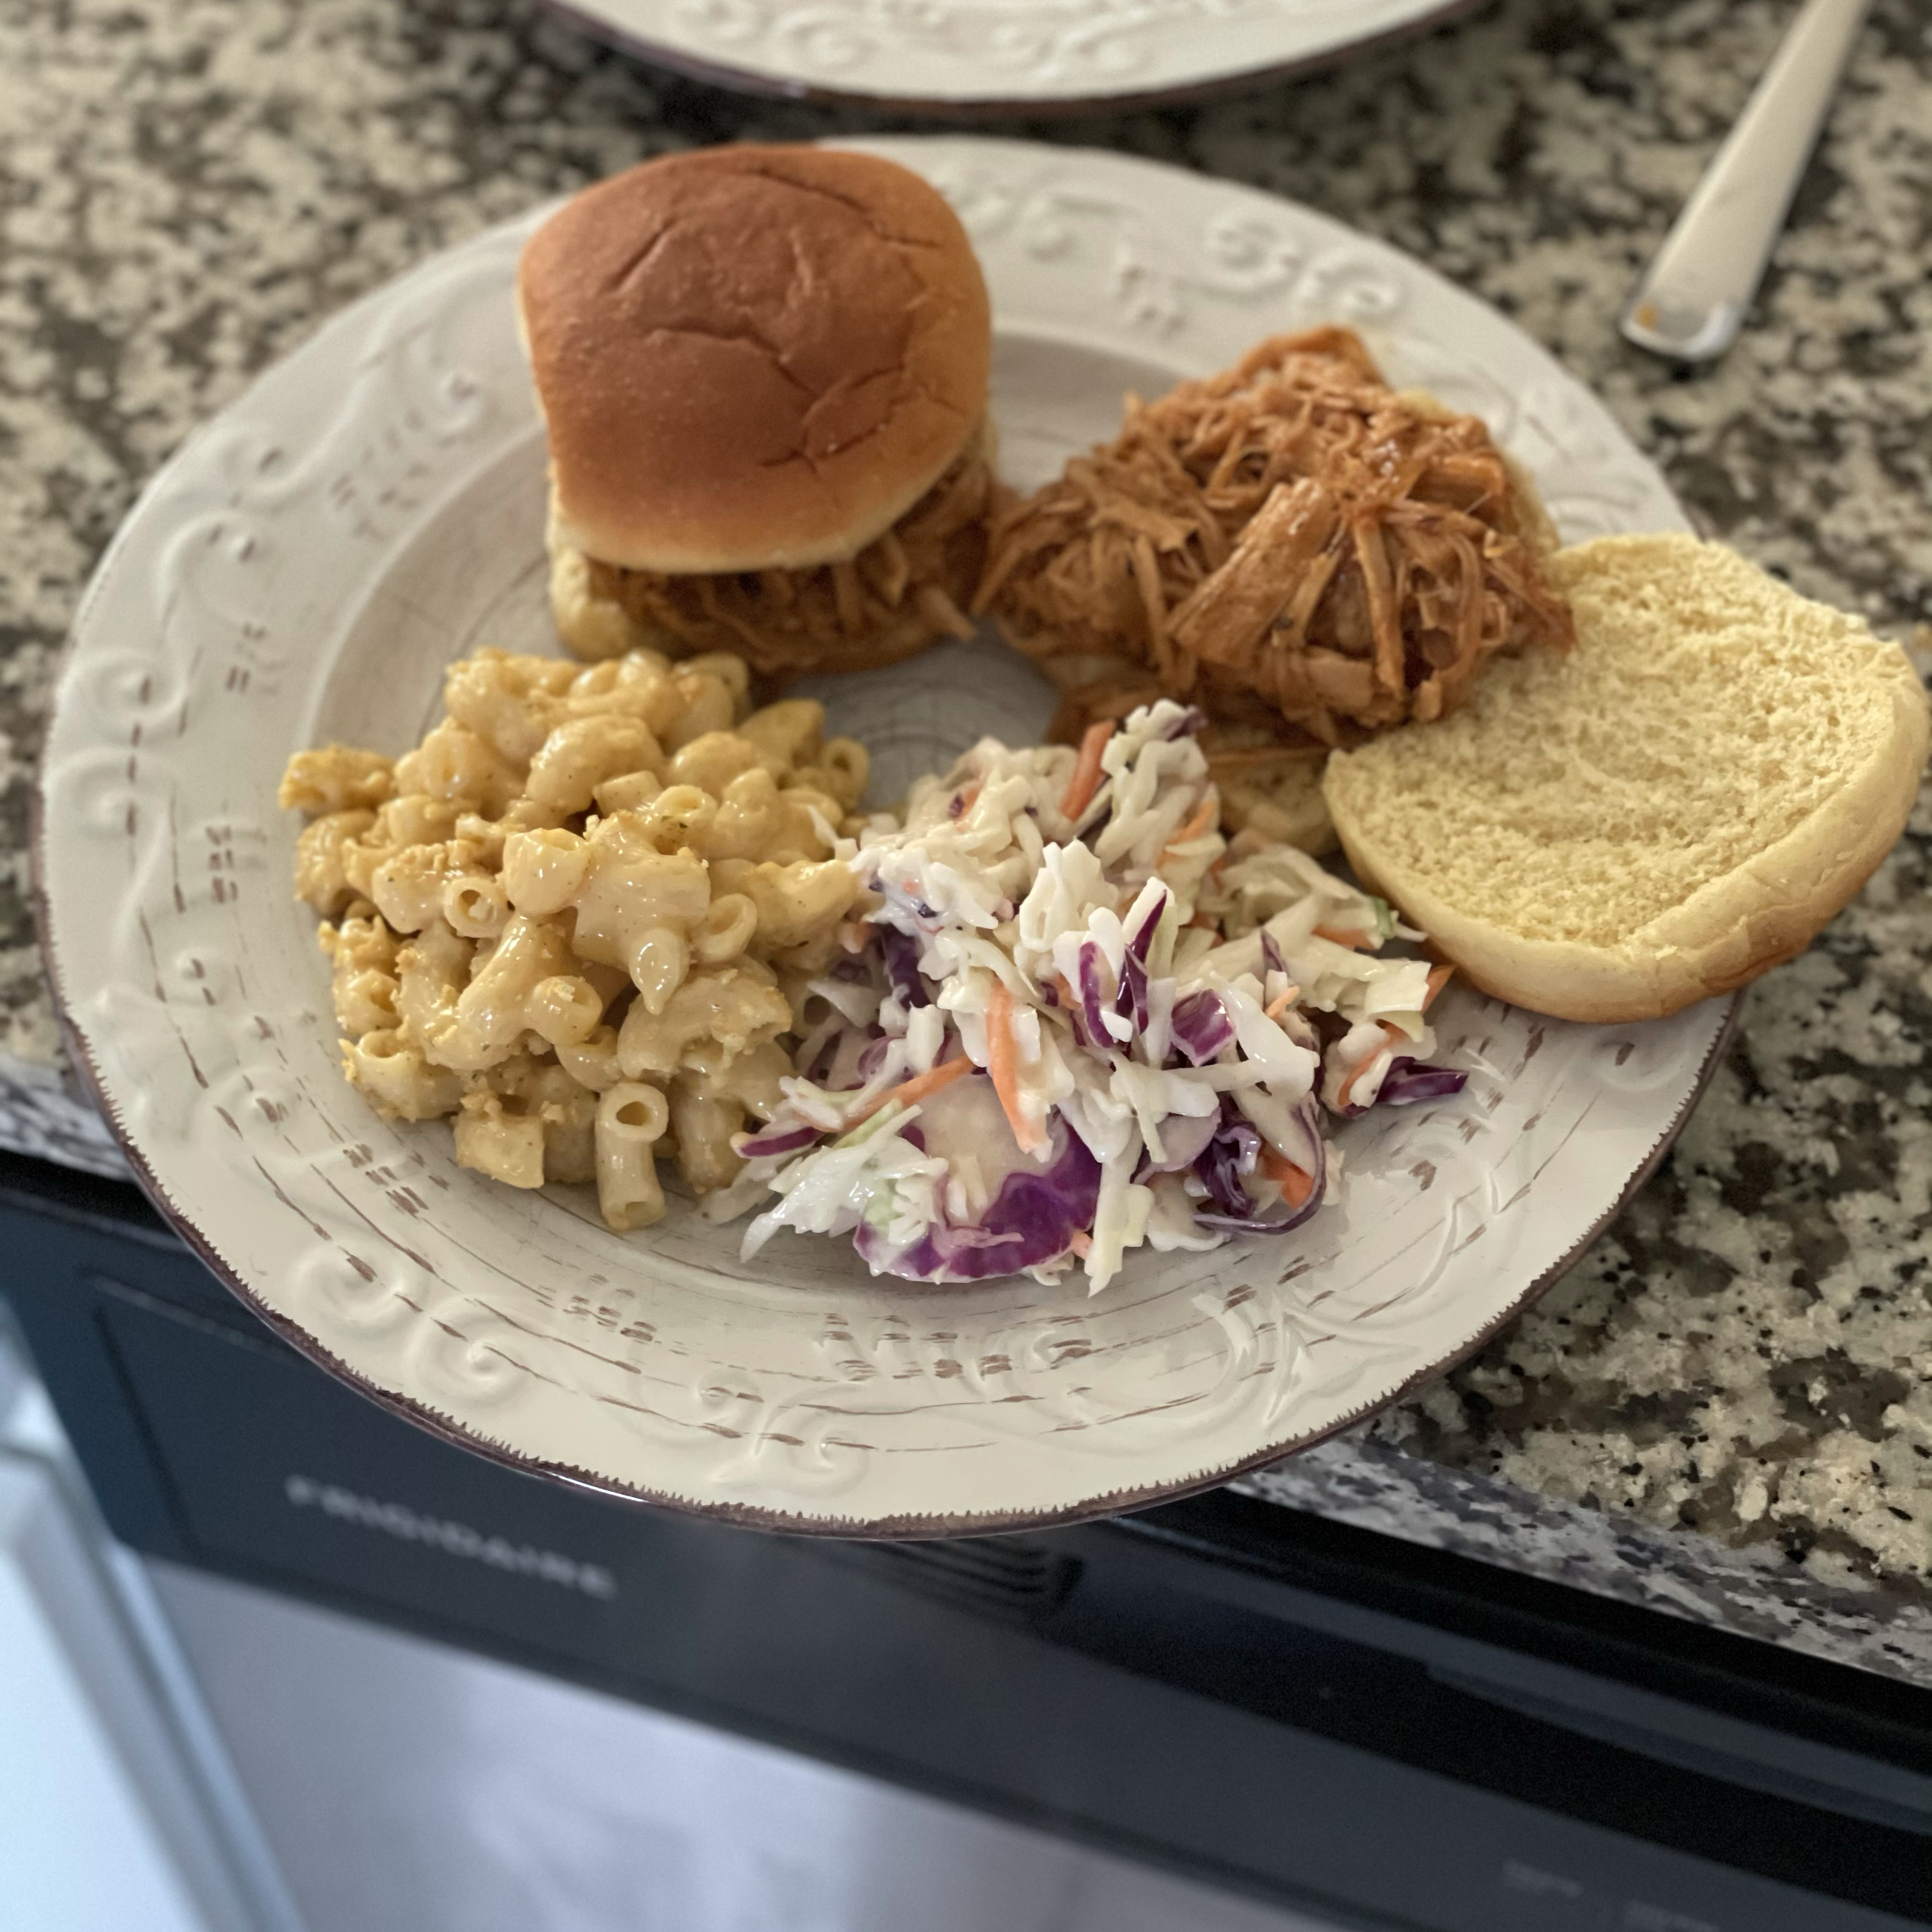 Slow Cooker Texas Pulled Pork 